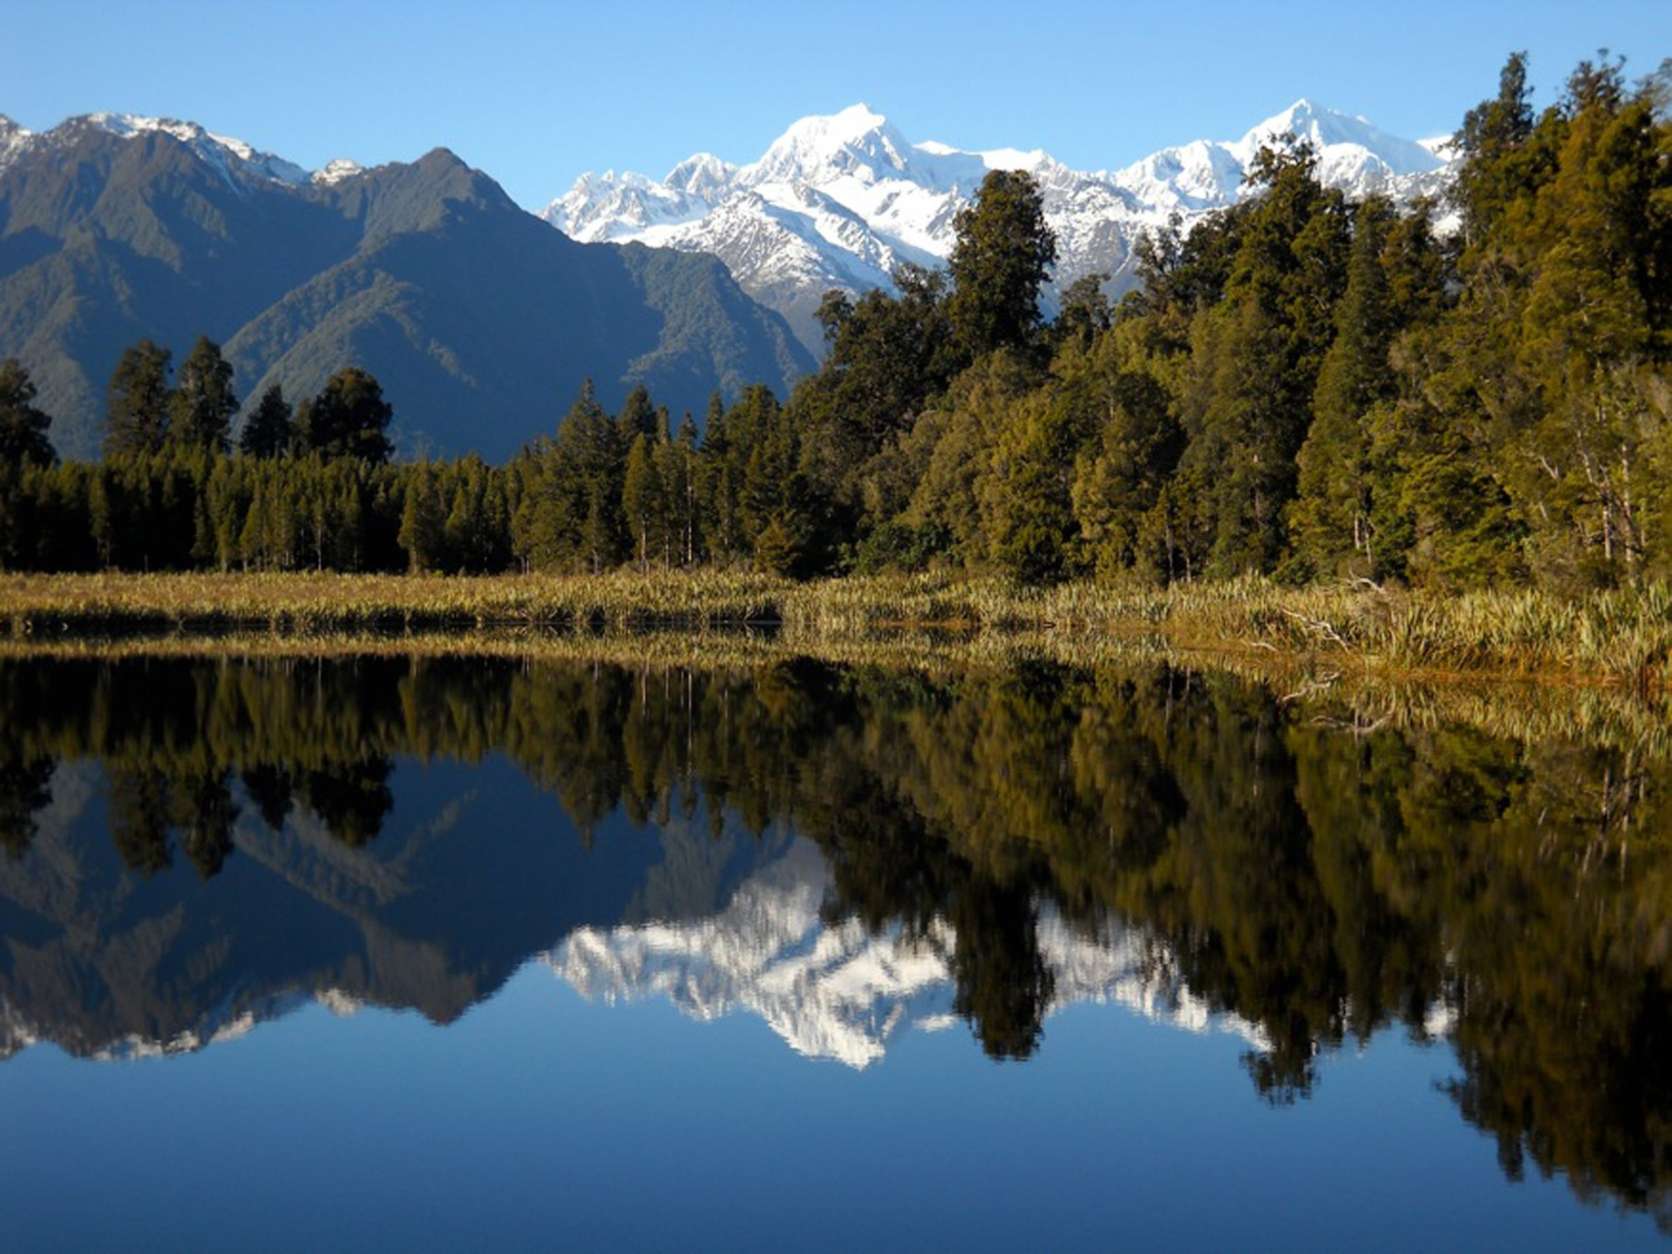 This photo taken June 1, 2009 shows the snow-capped Aoraki, also known as Mount Cook, is reflected in the still waters of Lake Matheson, New Zealand.  Aoraki, part of the Southern Alps, is the highest peak in the Southern Hemisphere. (AP Photo/Kathy Matheson)